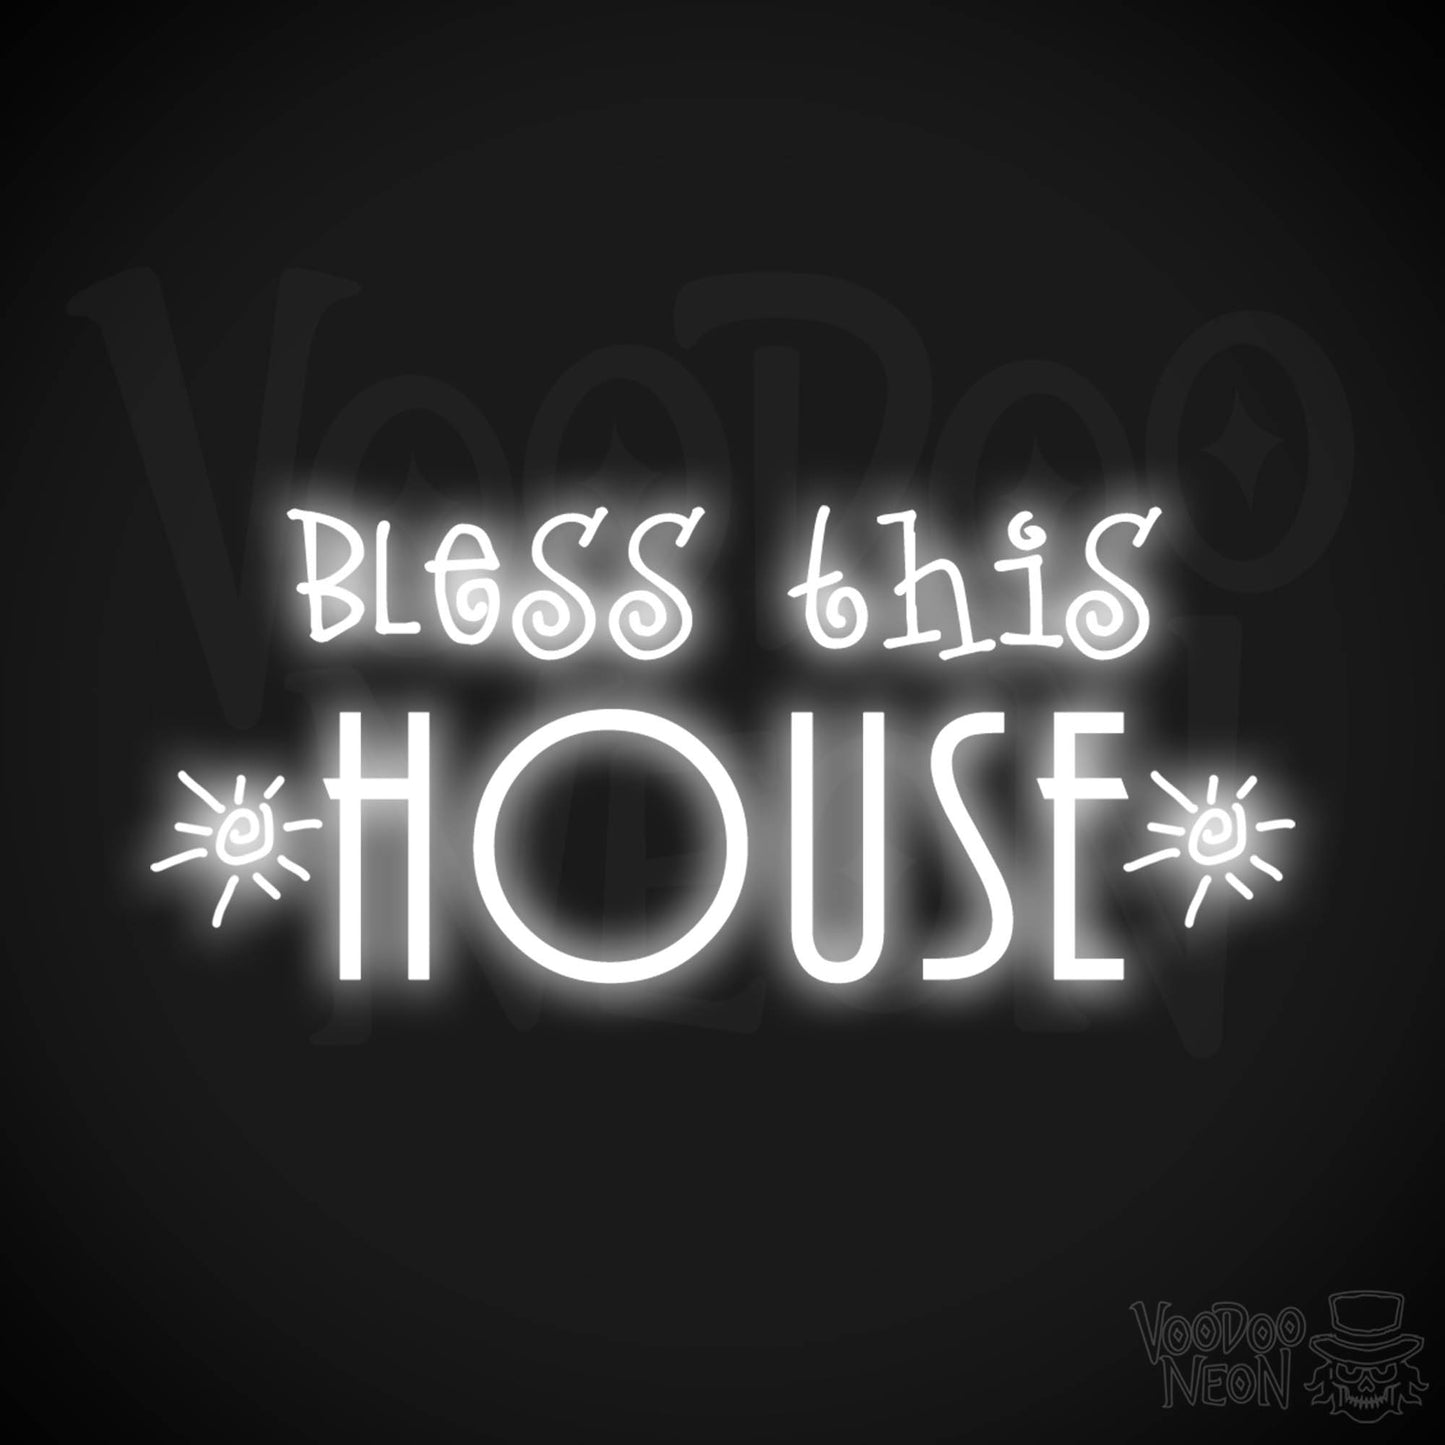 Bless This House Neon Sign - Neon Bless This House Sign - LED Light Up Sign - Color White